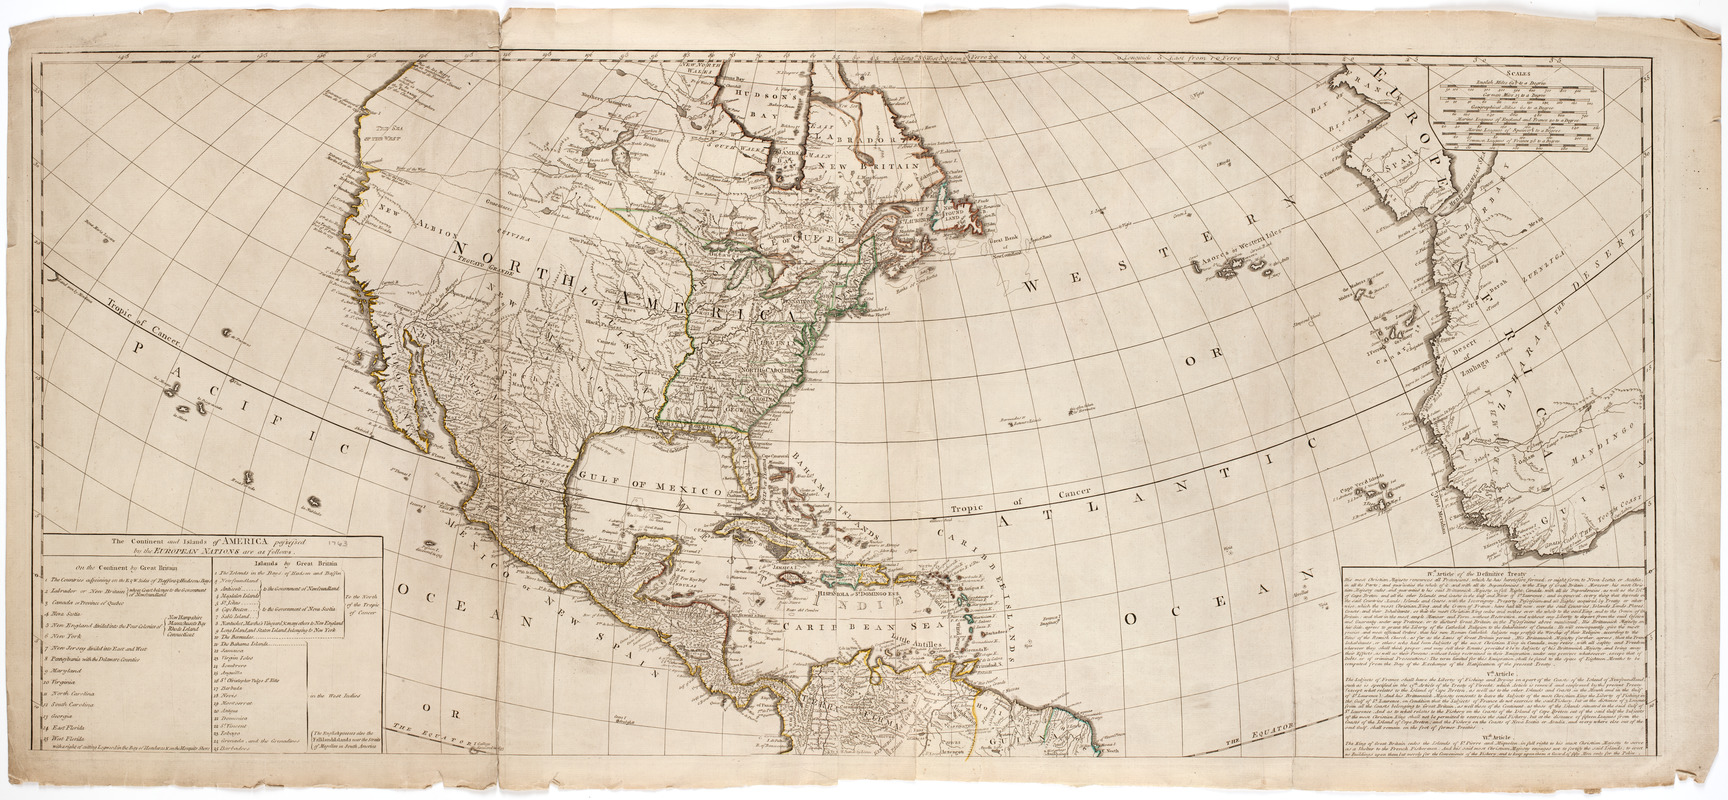 A New map of the whole continent of America, divided into North and South and West Indies.